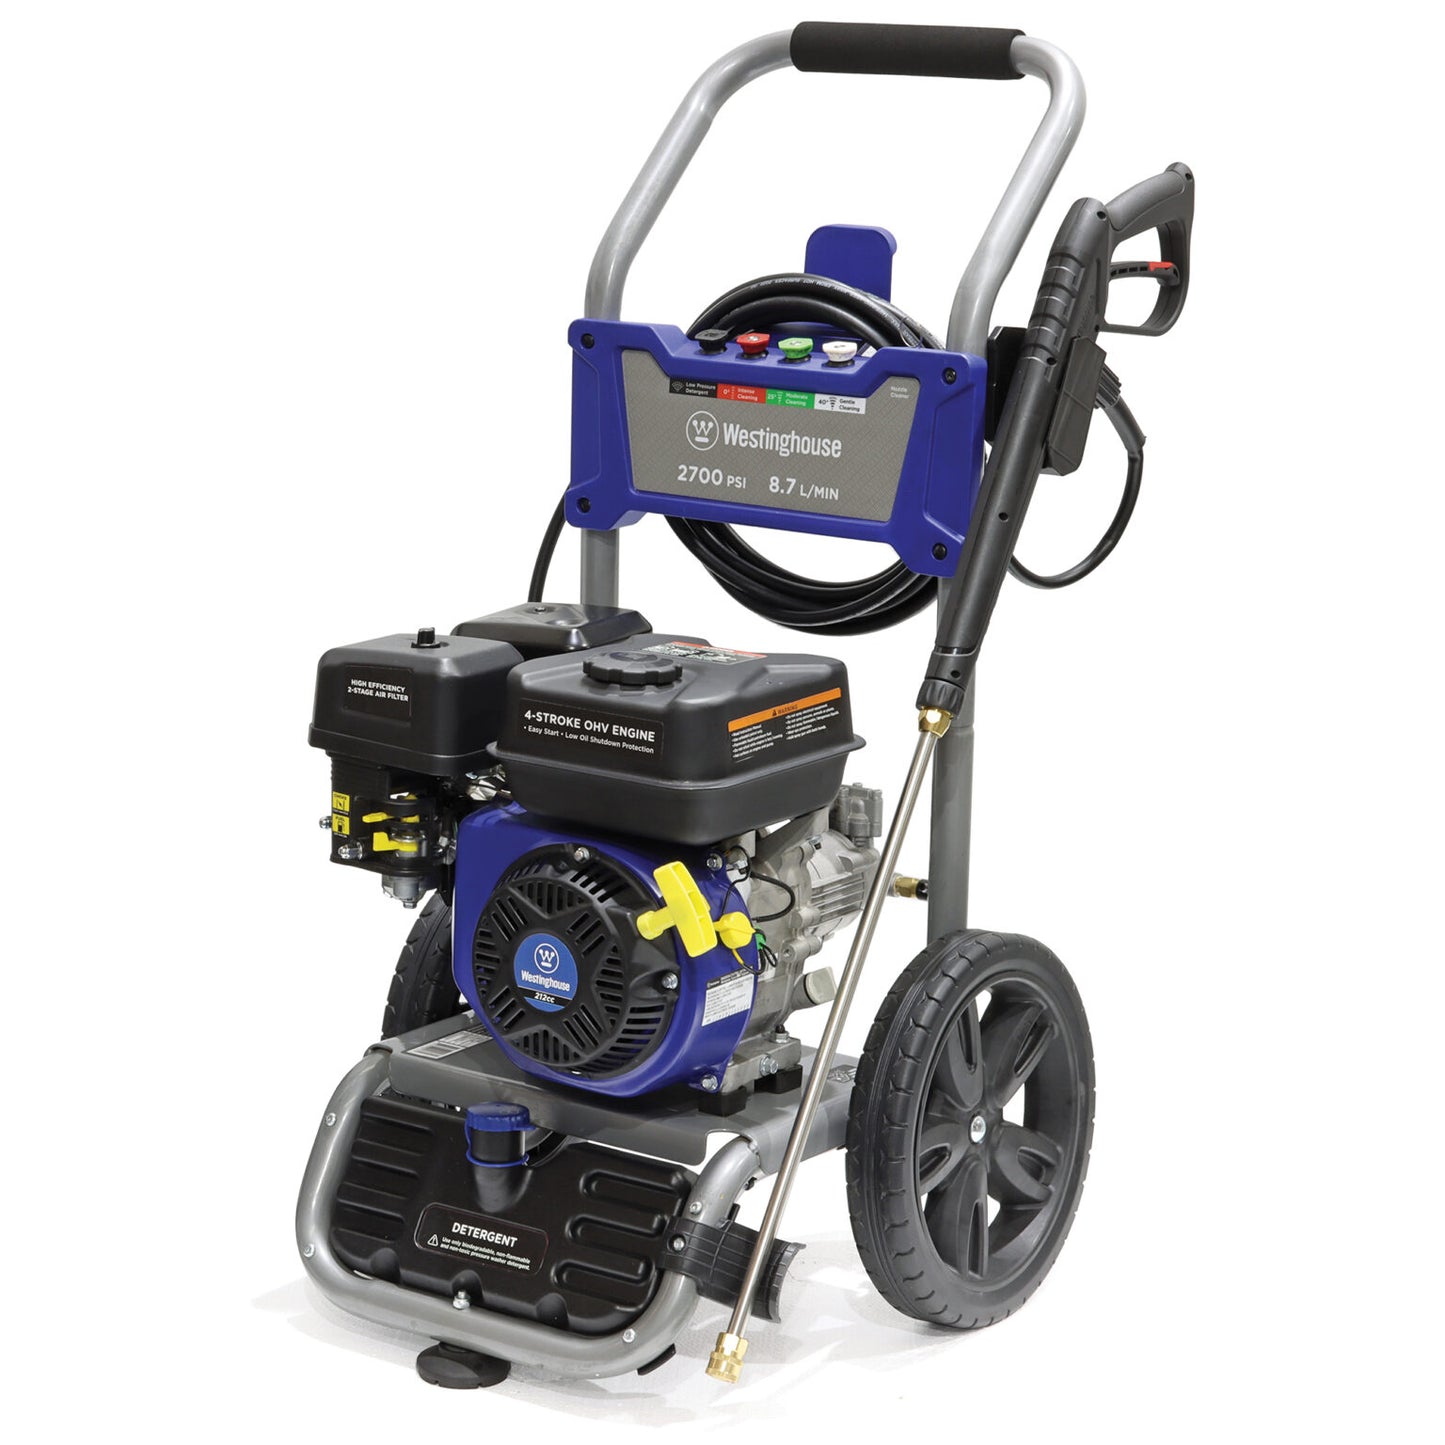 Westinghouse Petrol Pressure Washer WPX2700